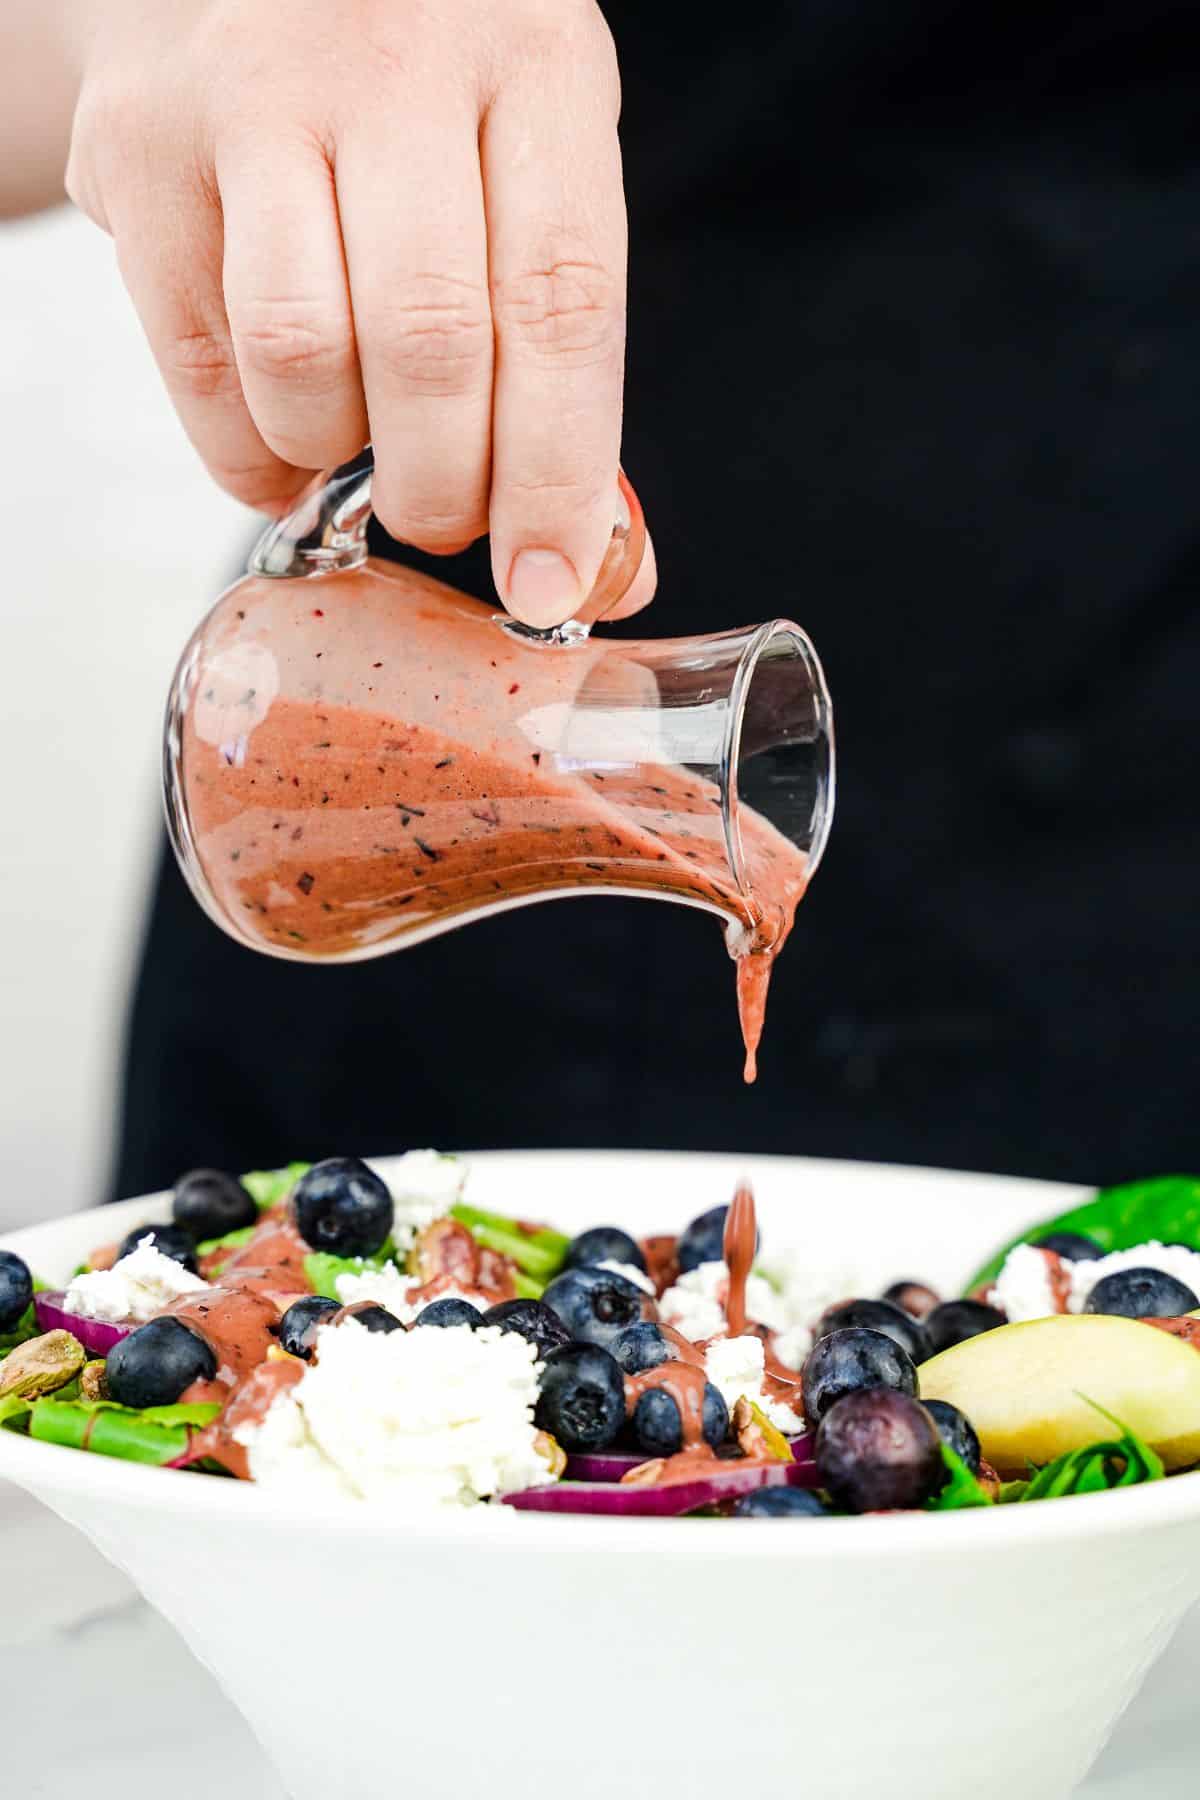 jar of salad dressing being poured over salad in white bowl